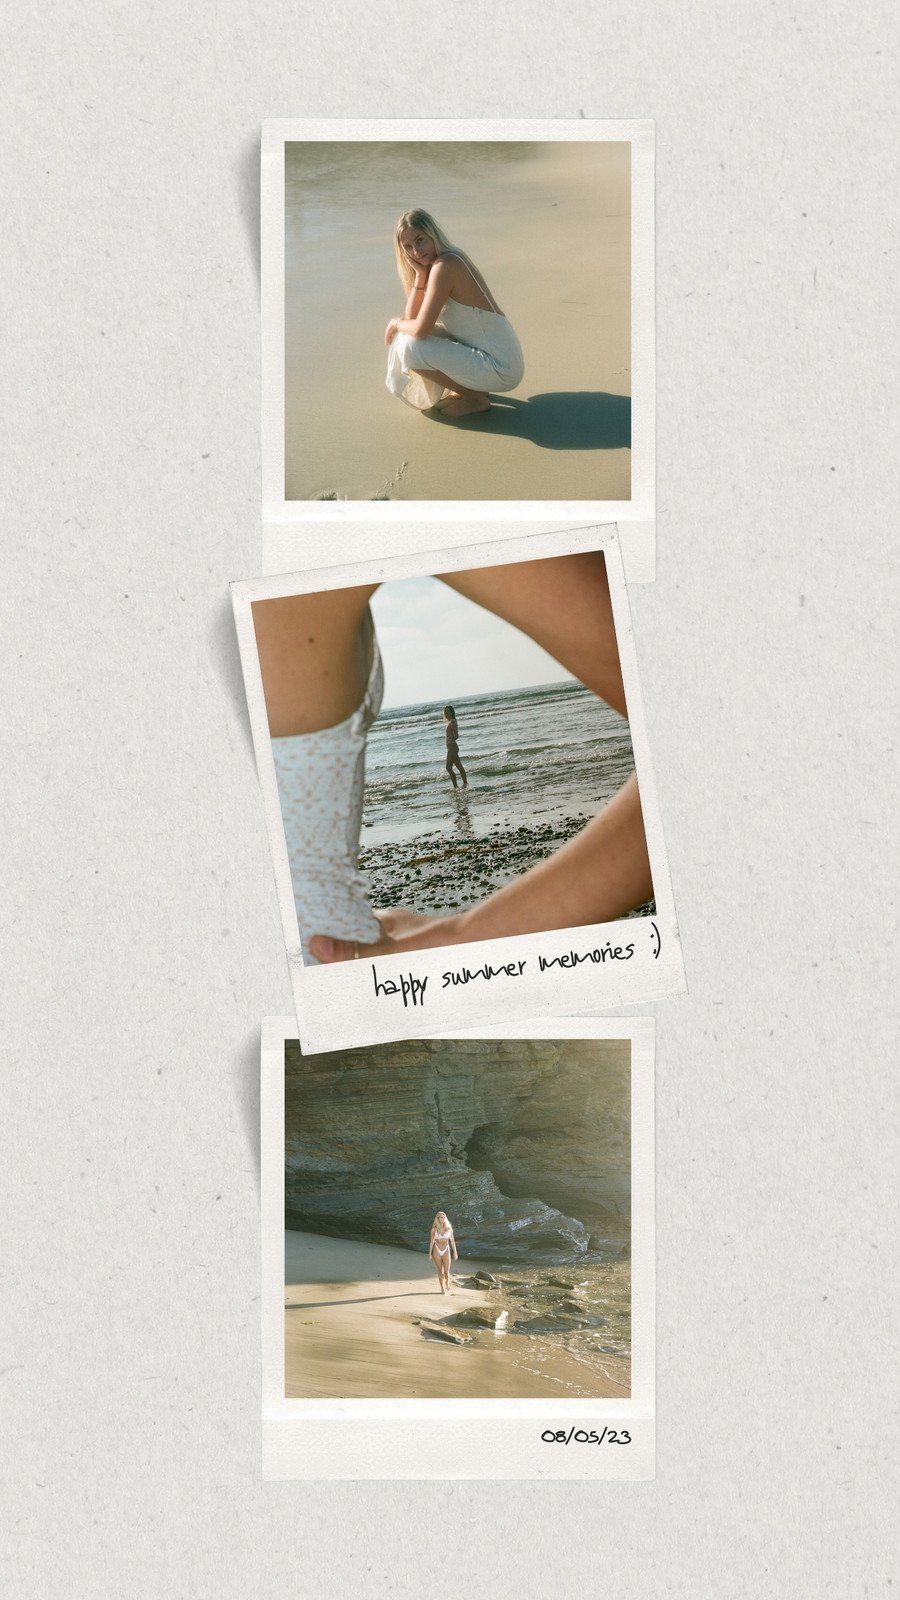 A collage of polaroid pictures of a woman at the beach. - Android, retro